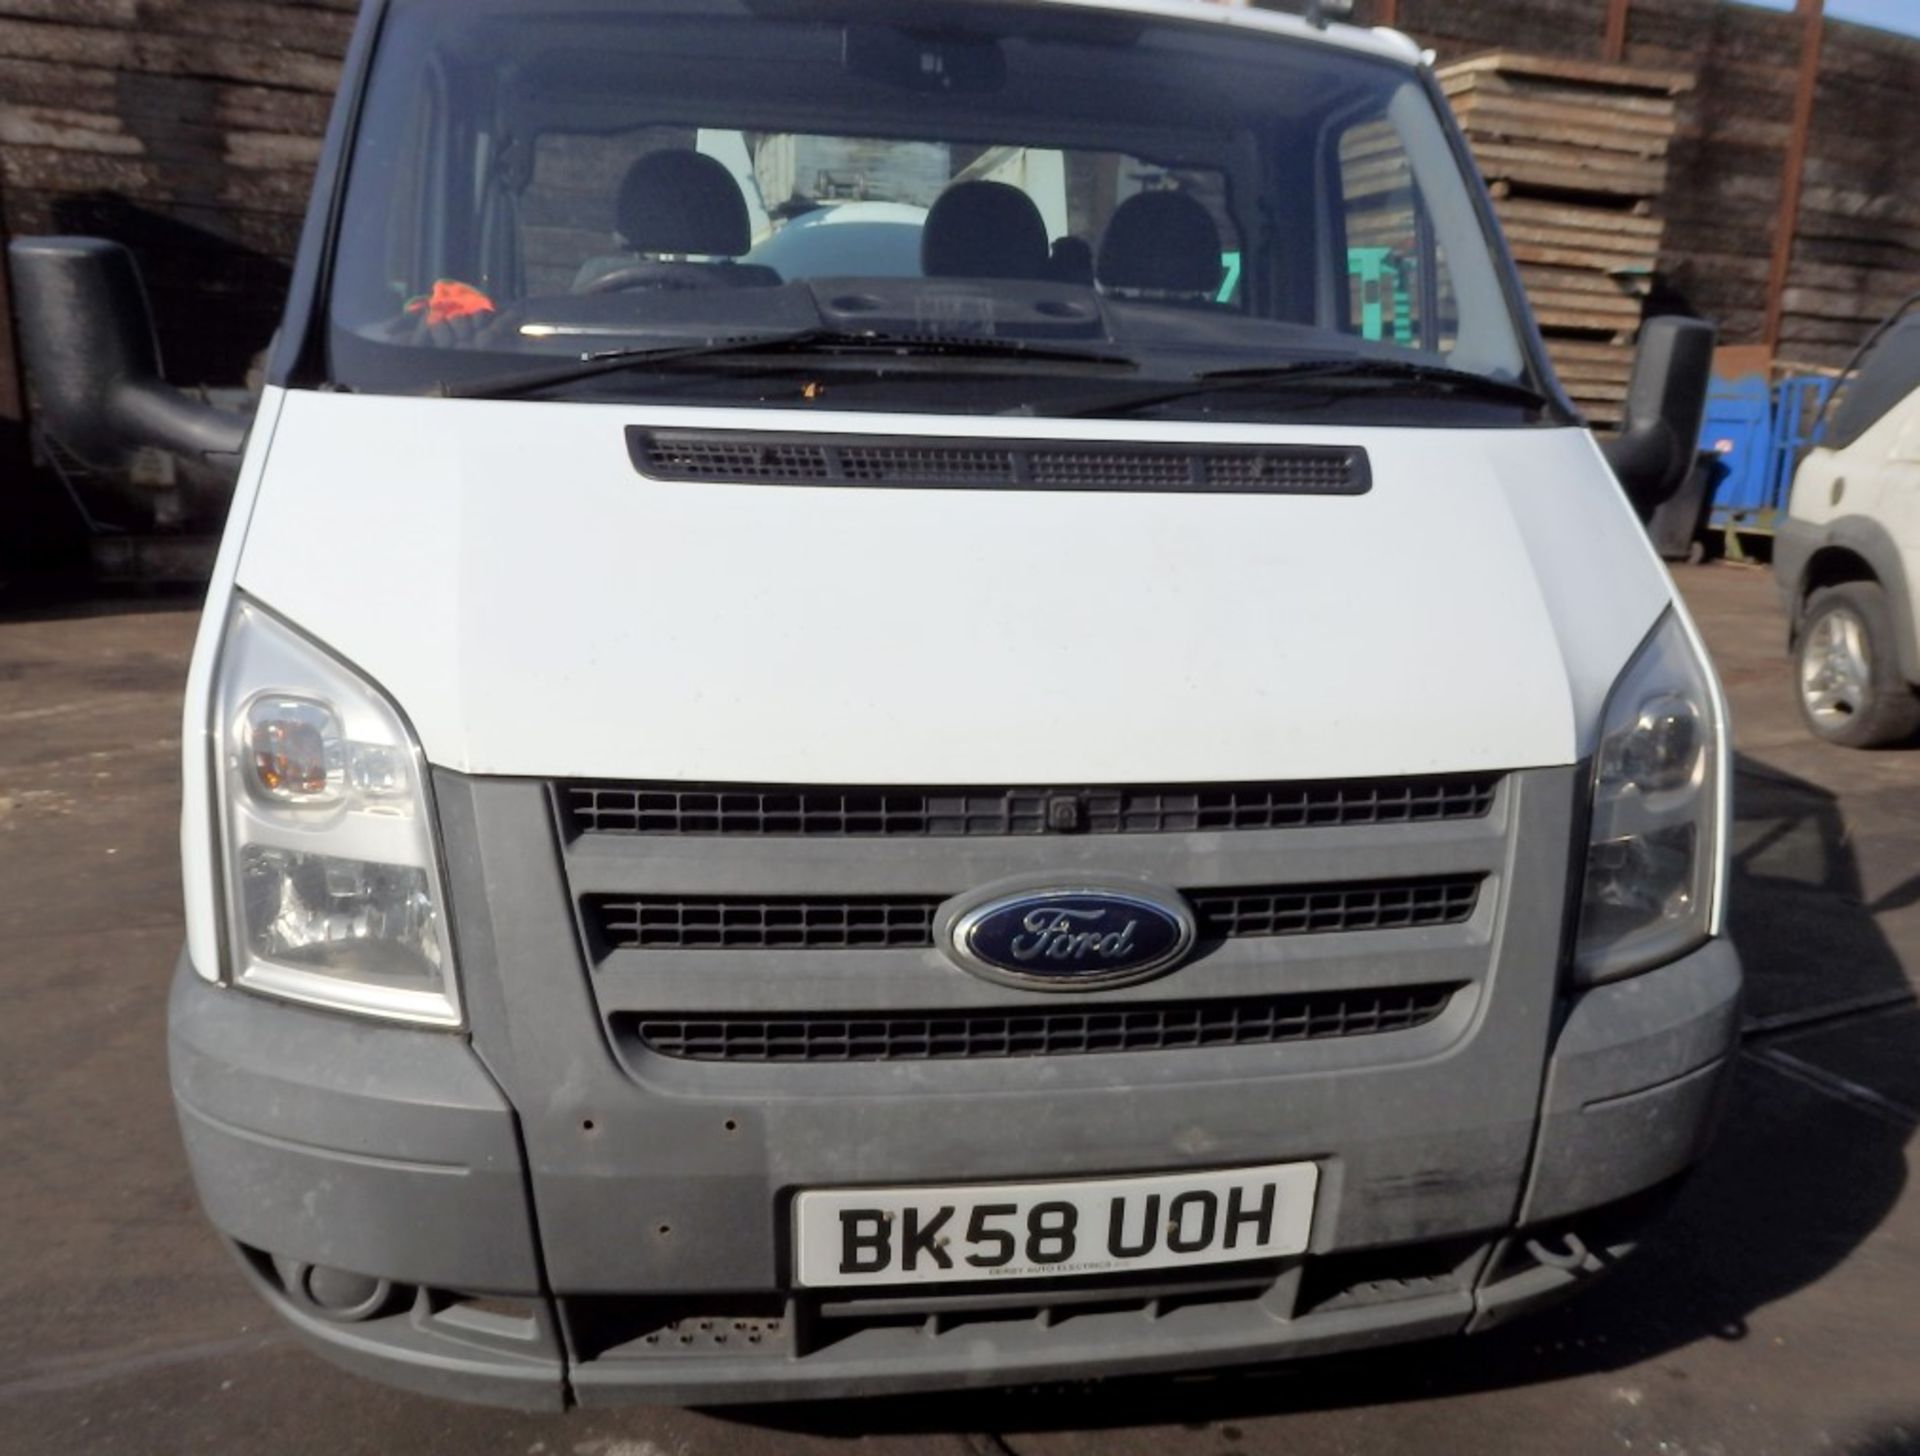 1 x 2009 Ford Transit T350 MWB Diesel Bowser in White - With 1200 Litre Tank and Reel Hose -  58 Reg - Image 20 of 51